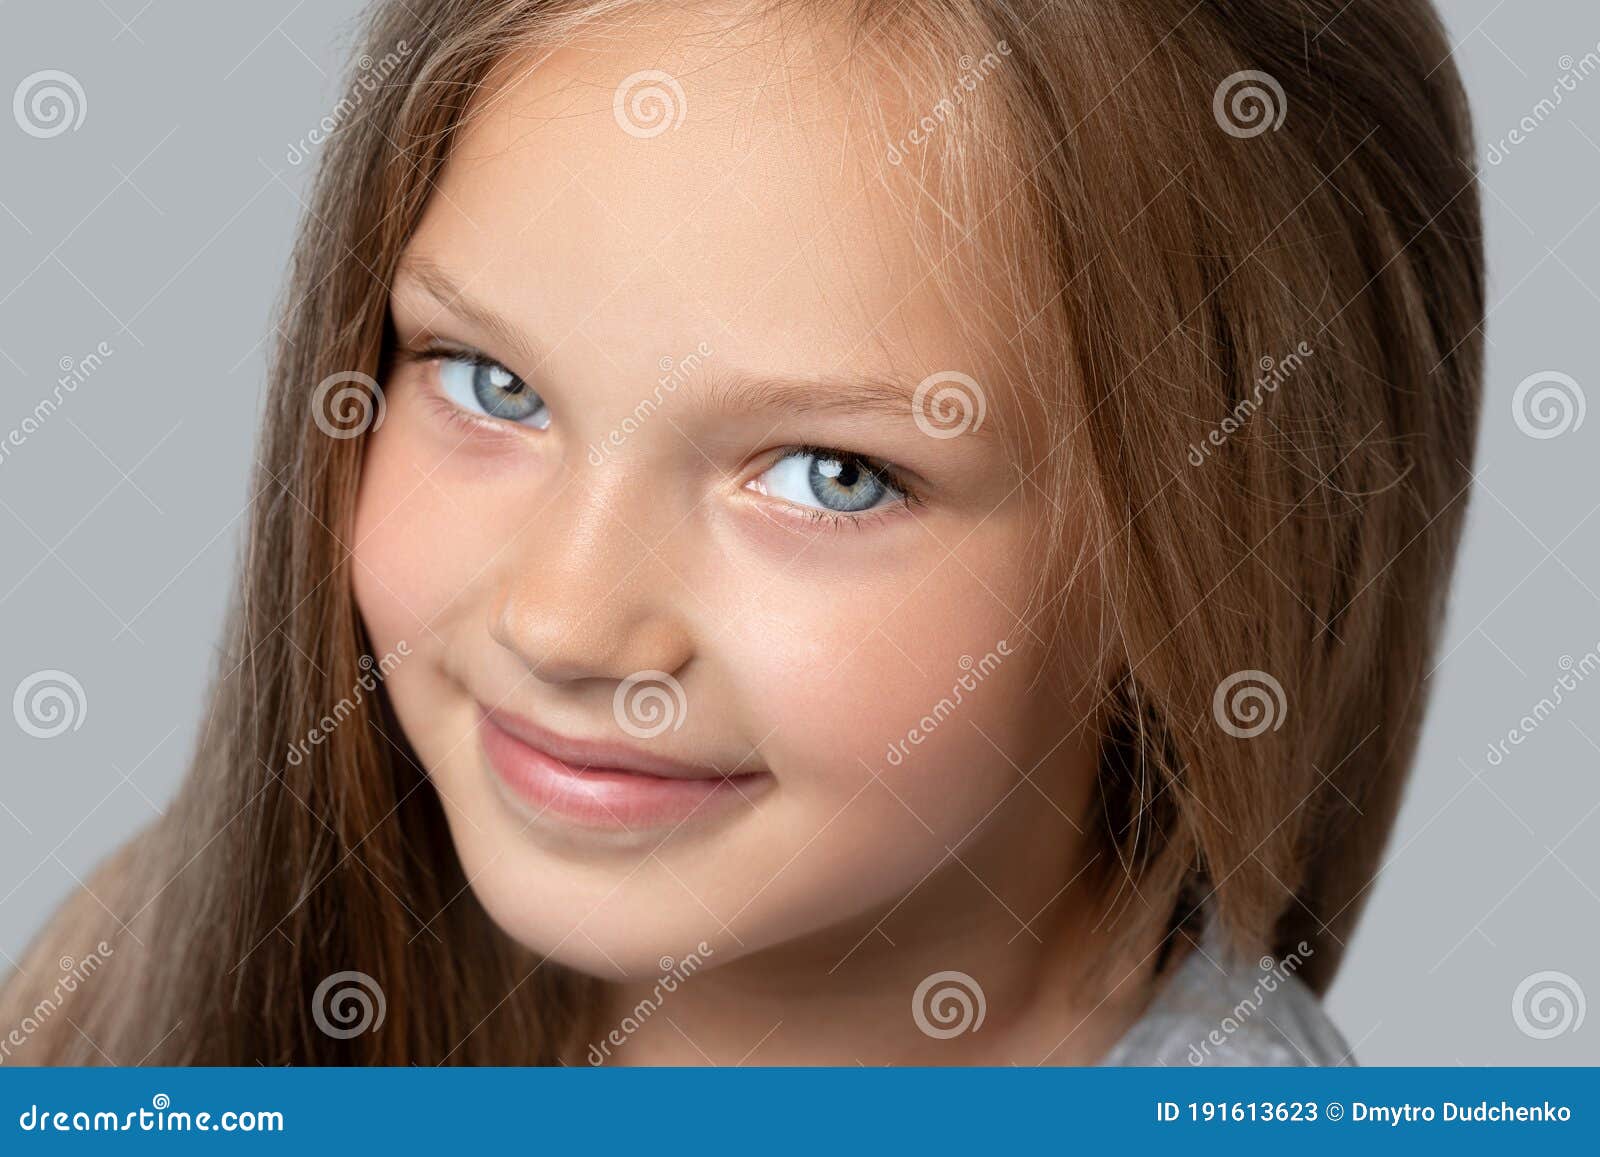 Portrait of a Beautiful Smiling Girl with Blue Eyes, with Light Brown Hair.  she Looks into the Camera Stock Image - Image of beautiful, daughter:  191613623